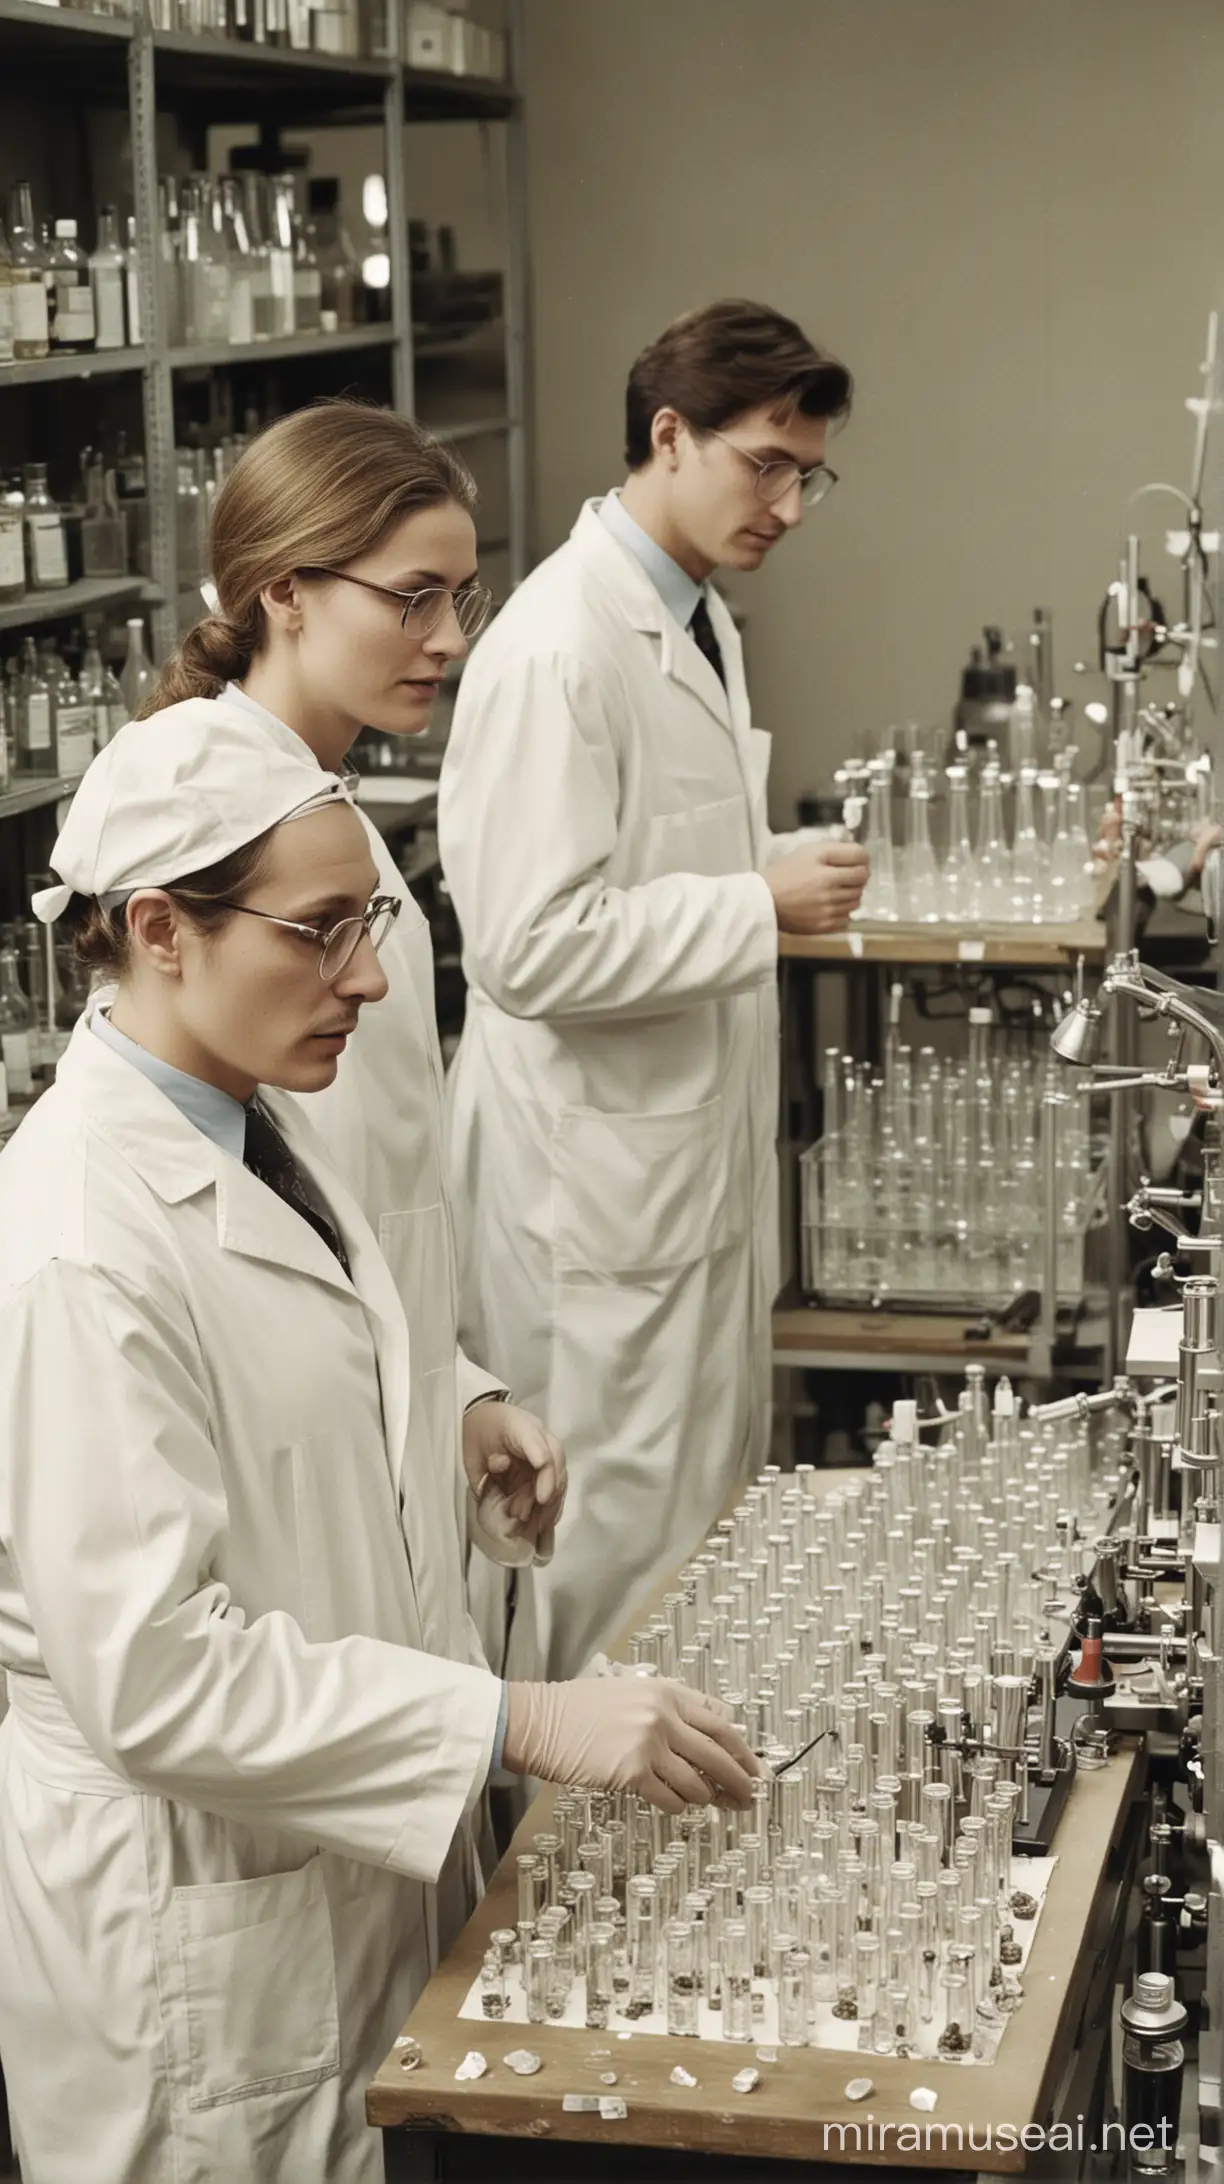 Some scientists in civilian clothes, in a lab, synthesizing magnesium glycine, a factory assembly line